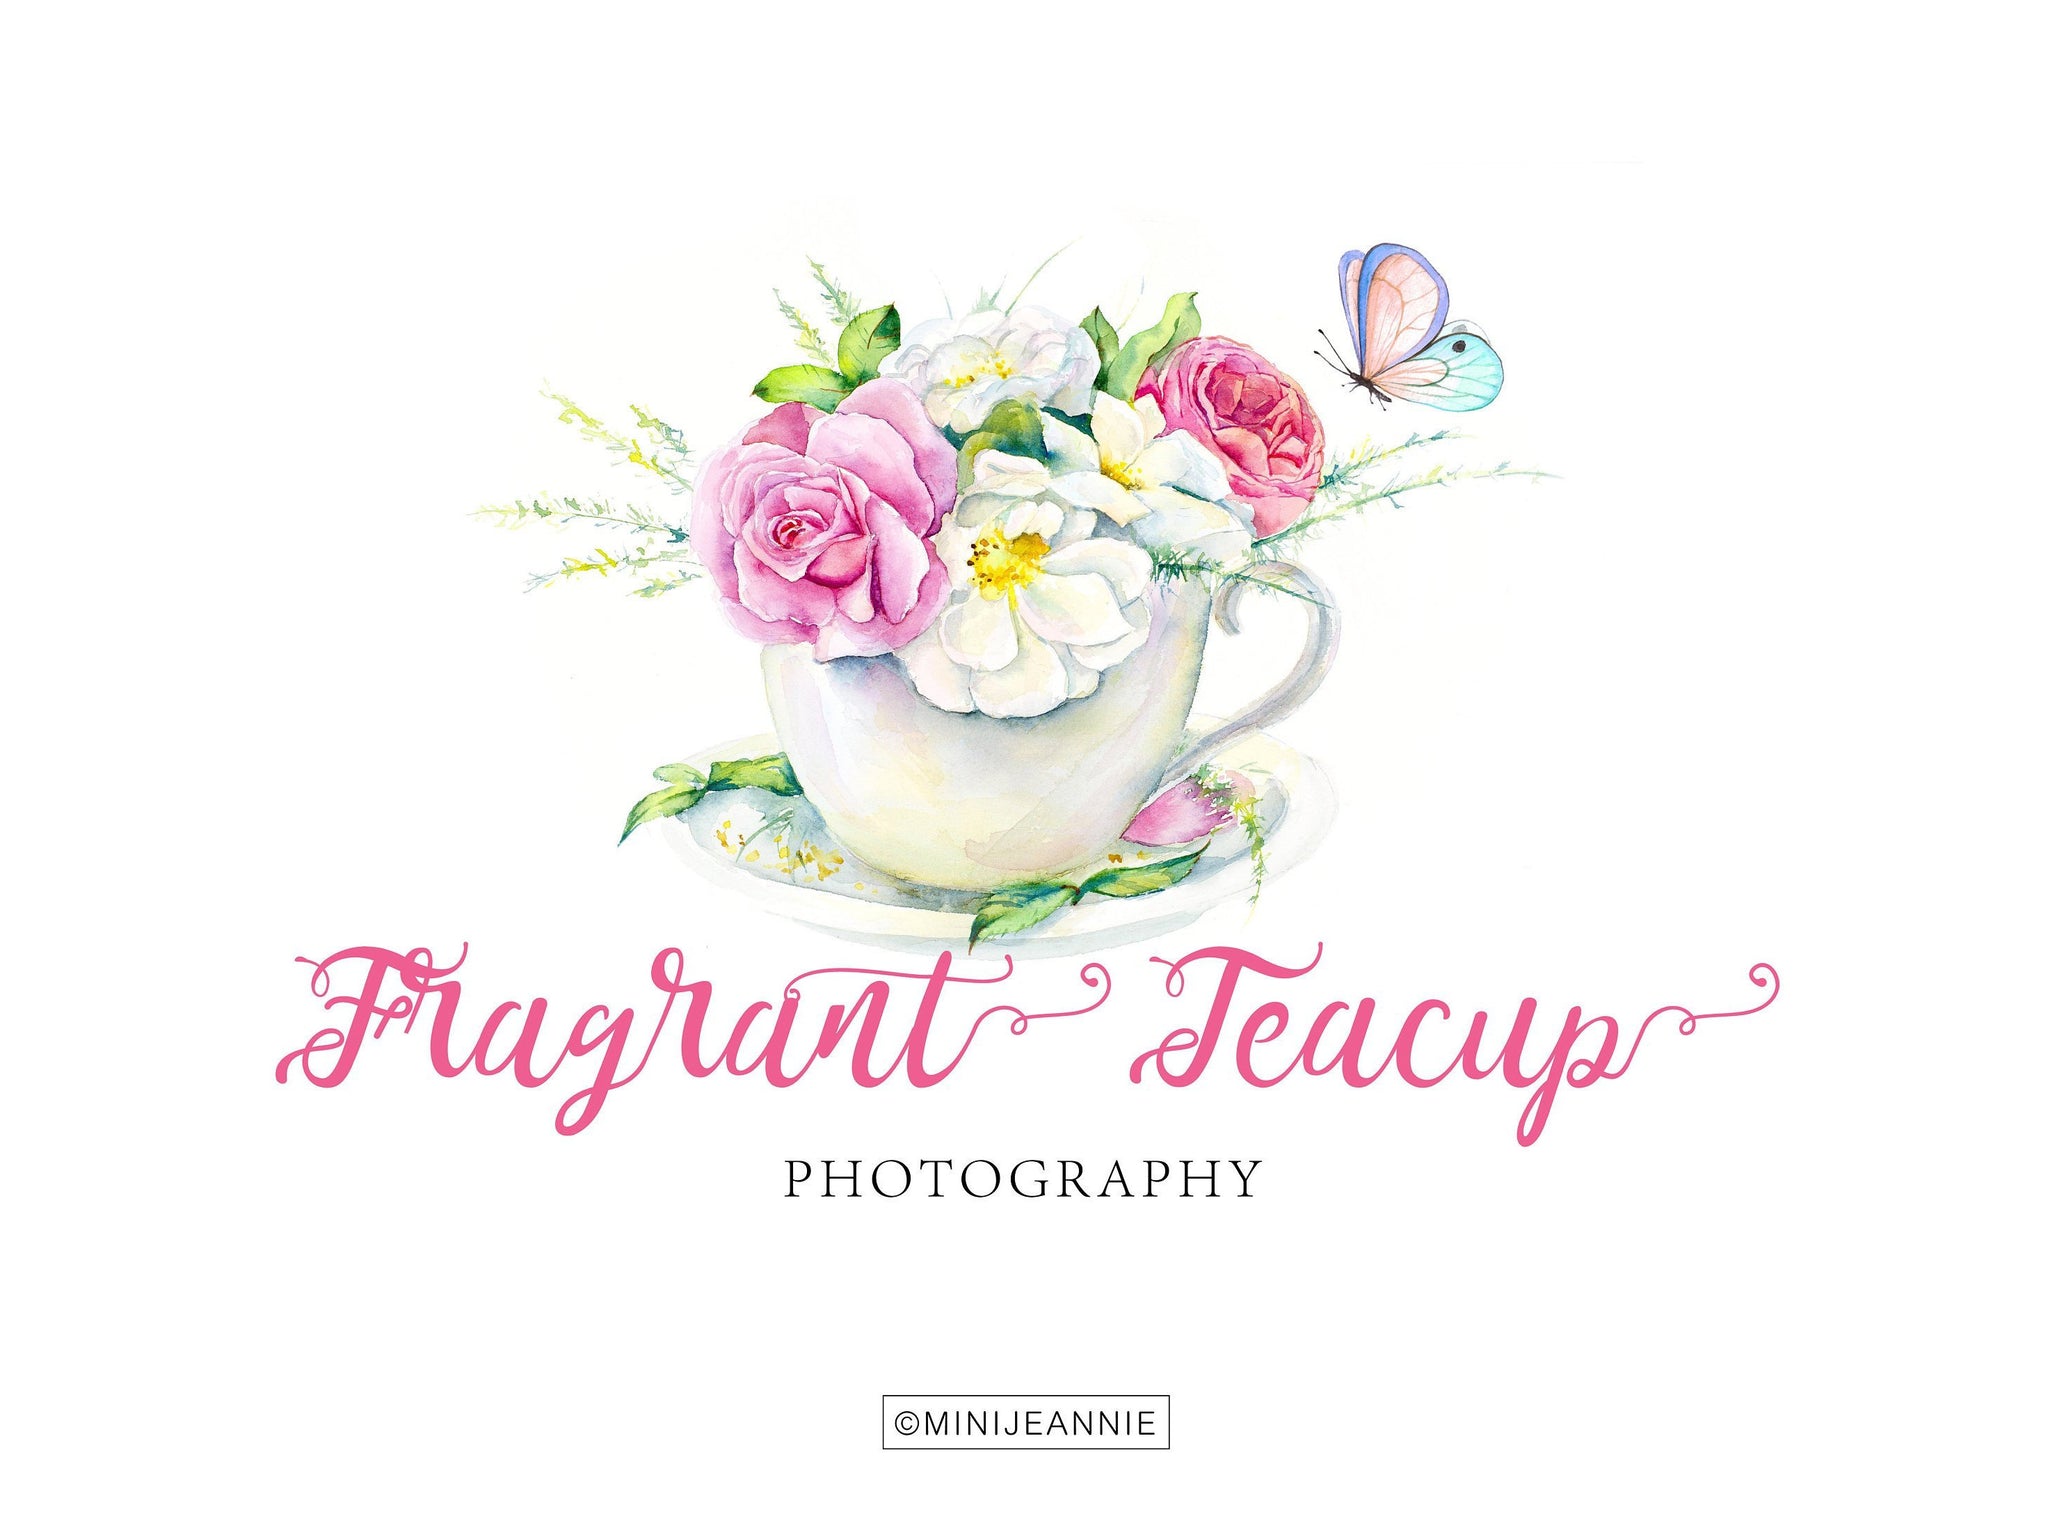 Tea Cup Logo-Rose in Cup Logo-Floral Logo-Flower in Tea Cup Logo-Butterfly Logo-Watercolor Floral Logo-Free Font Change